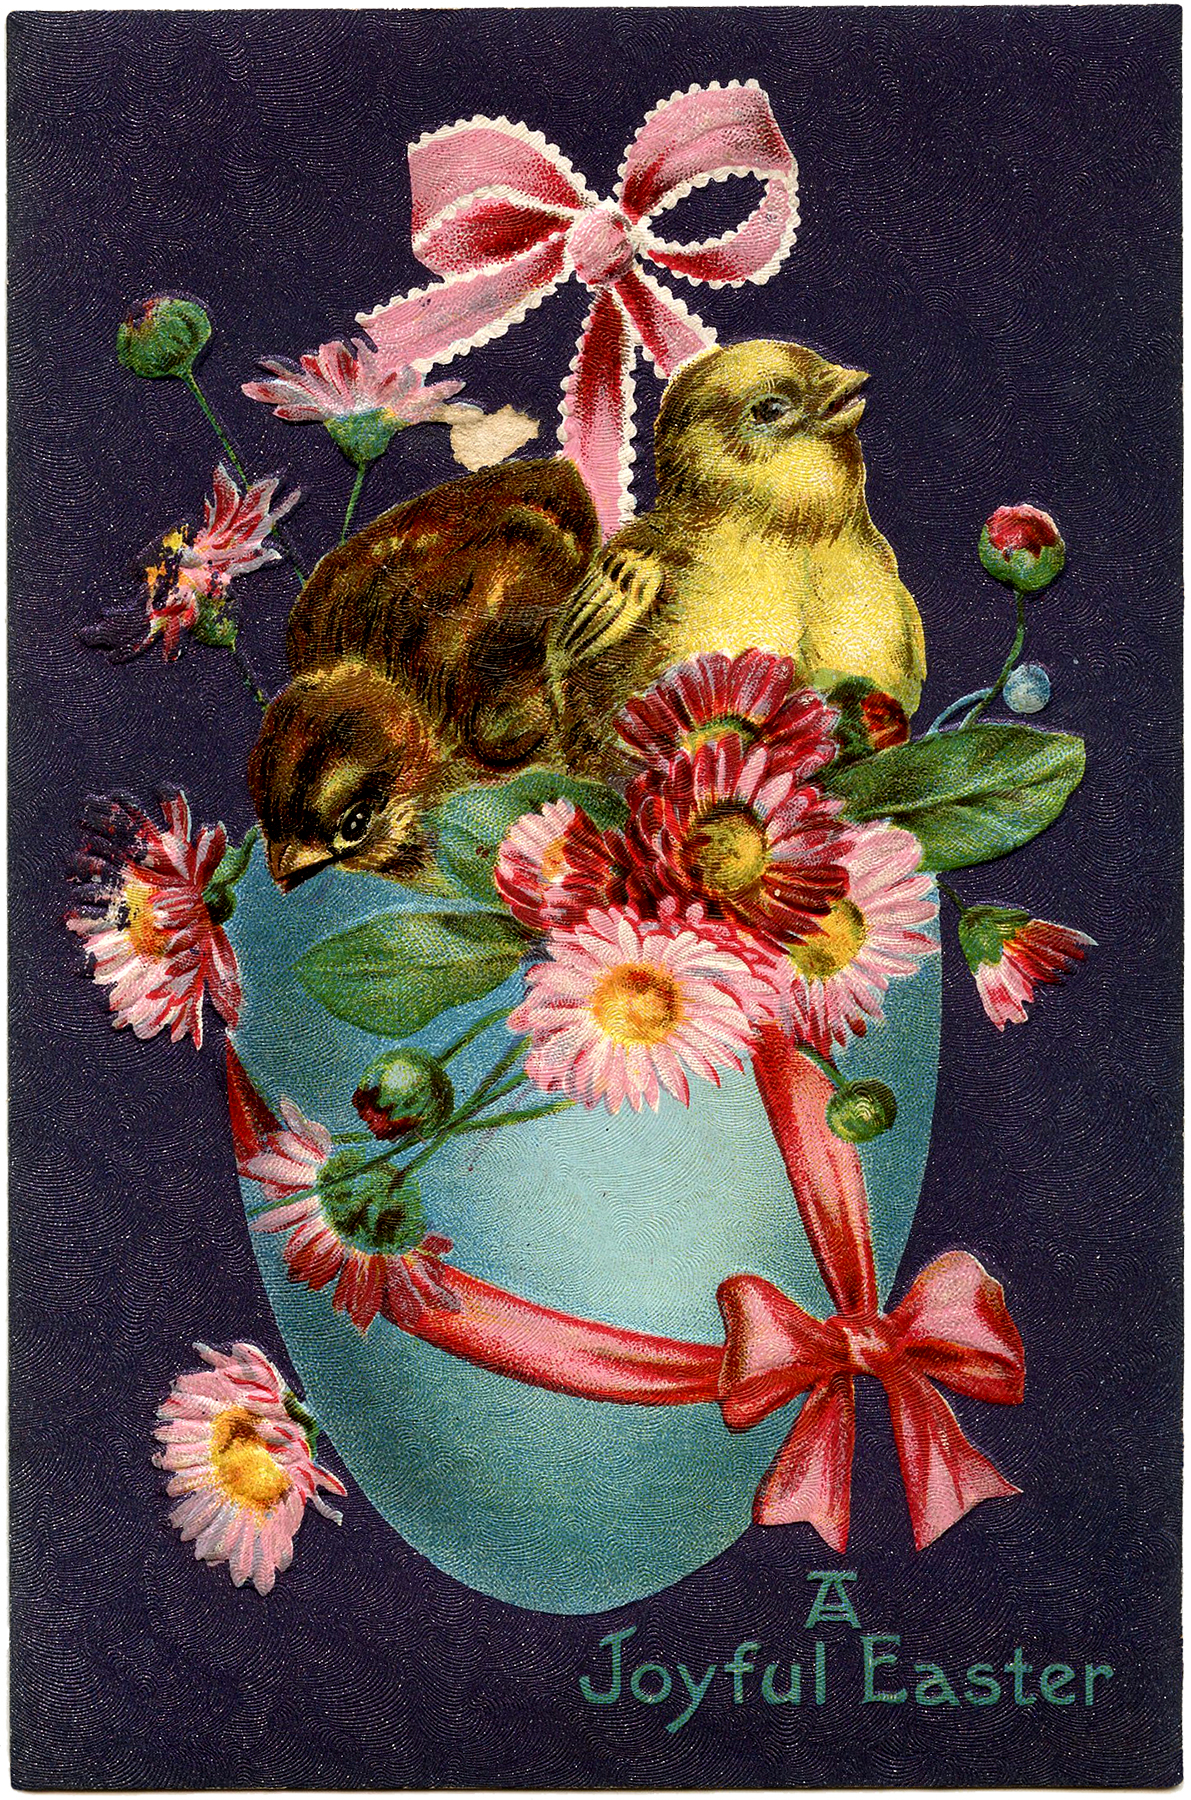 Vintage Easter Stock Image - Super Pretty! - The Graphics Fairy